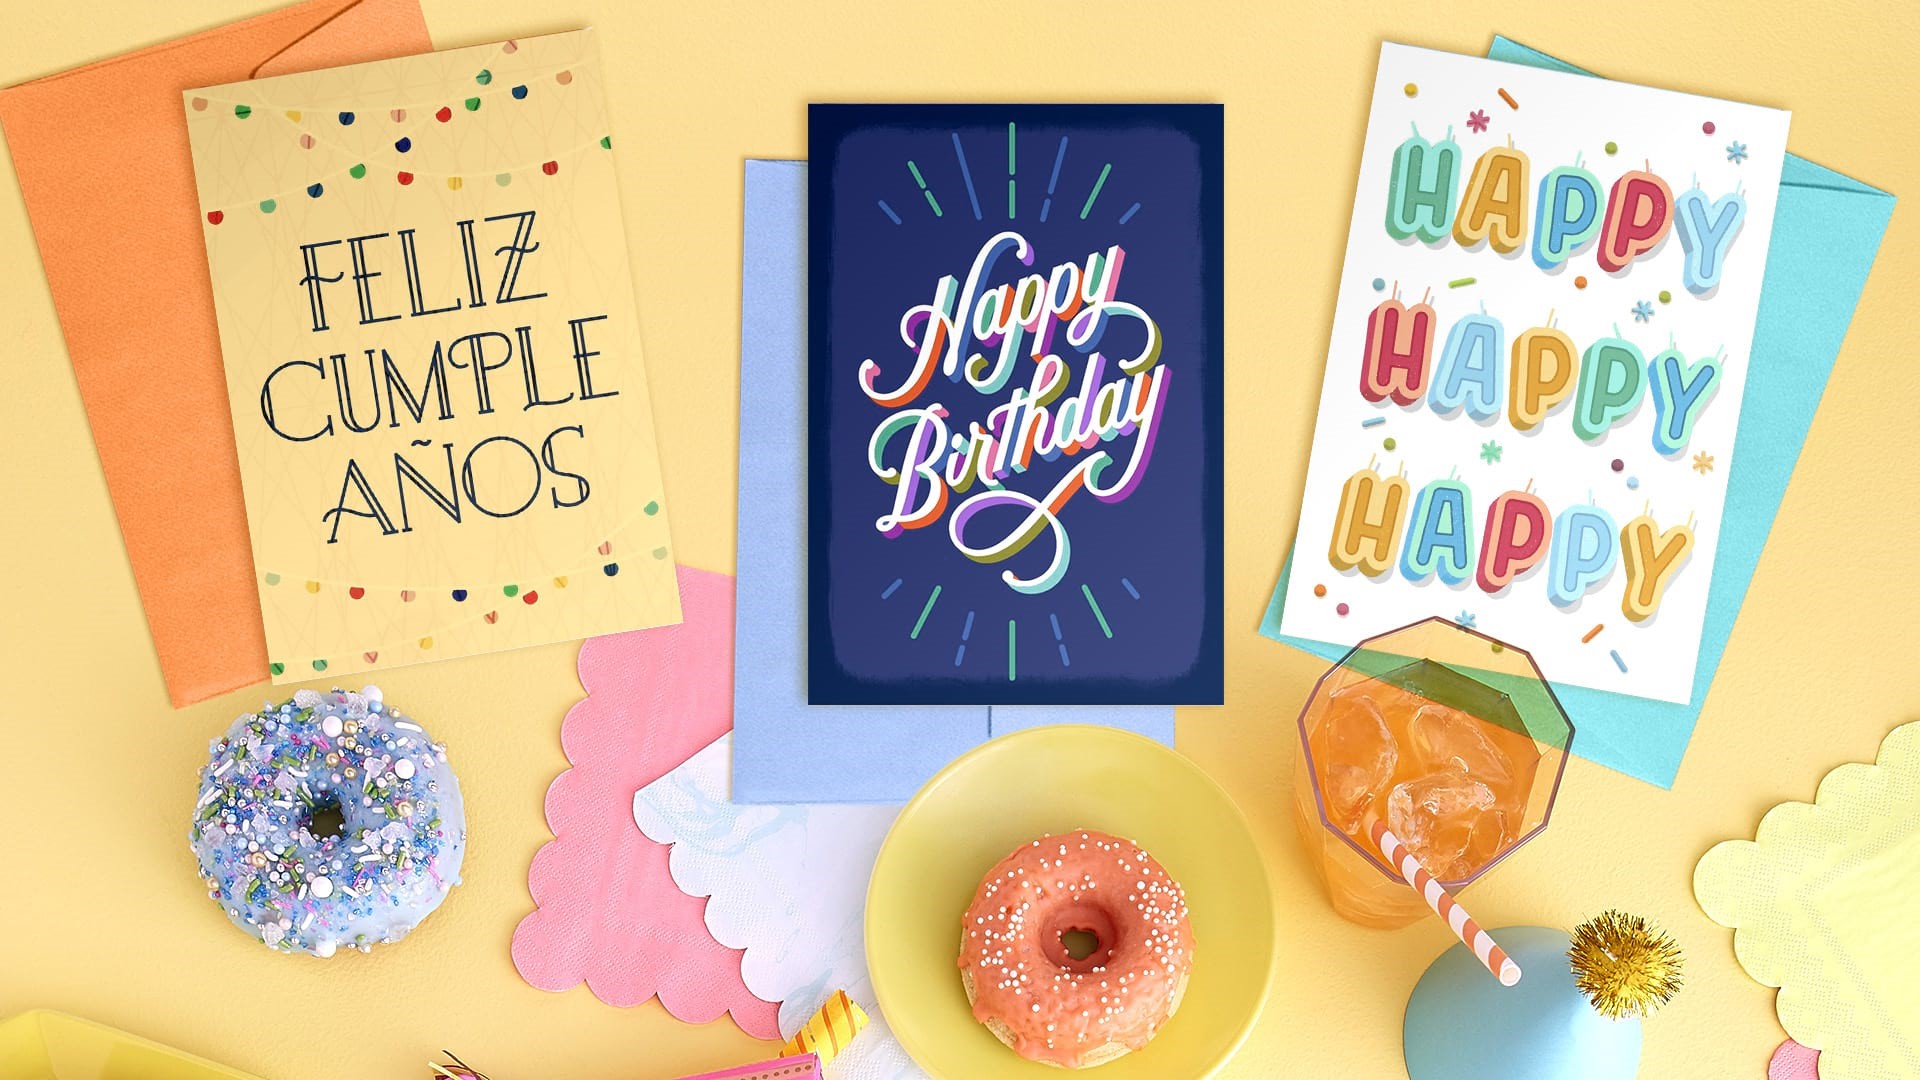 25 Sentiments for Staff Birthday Cards